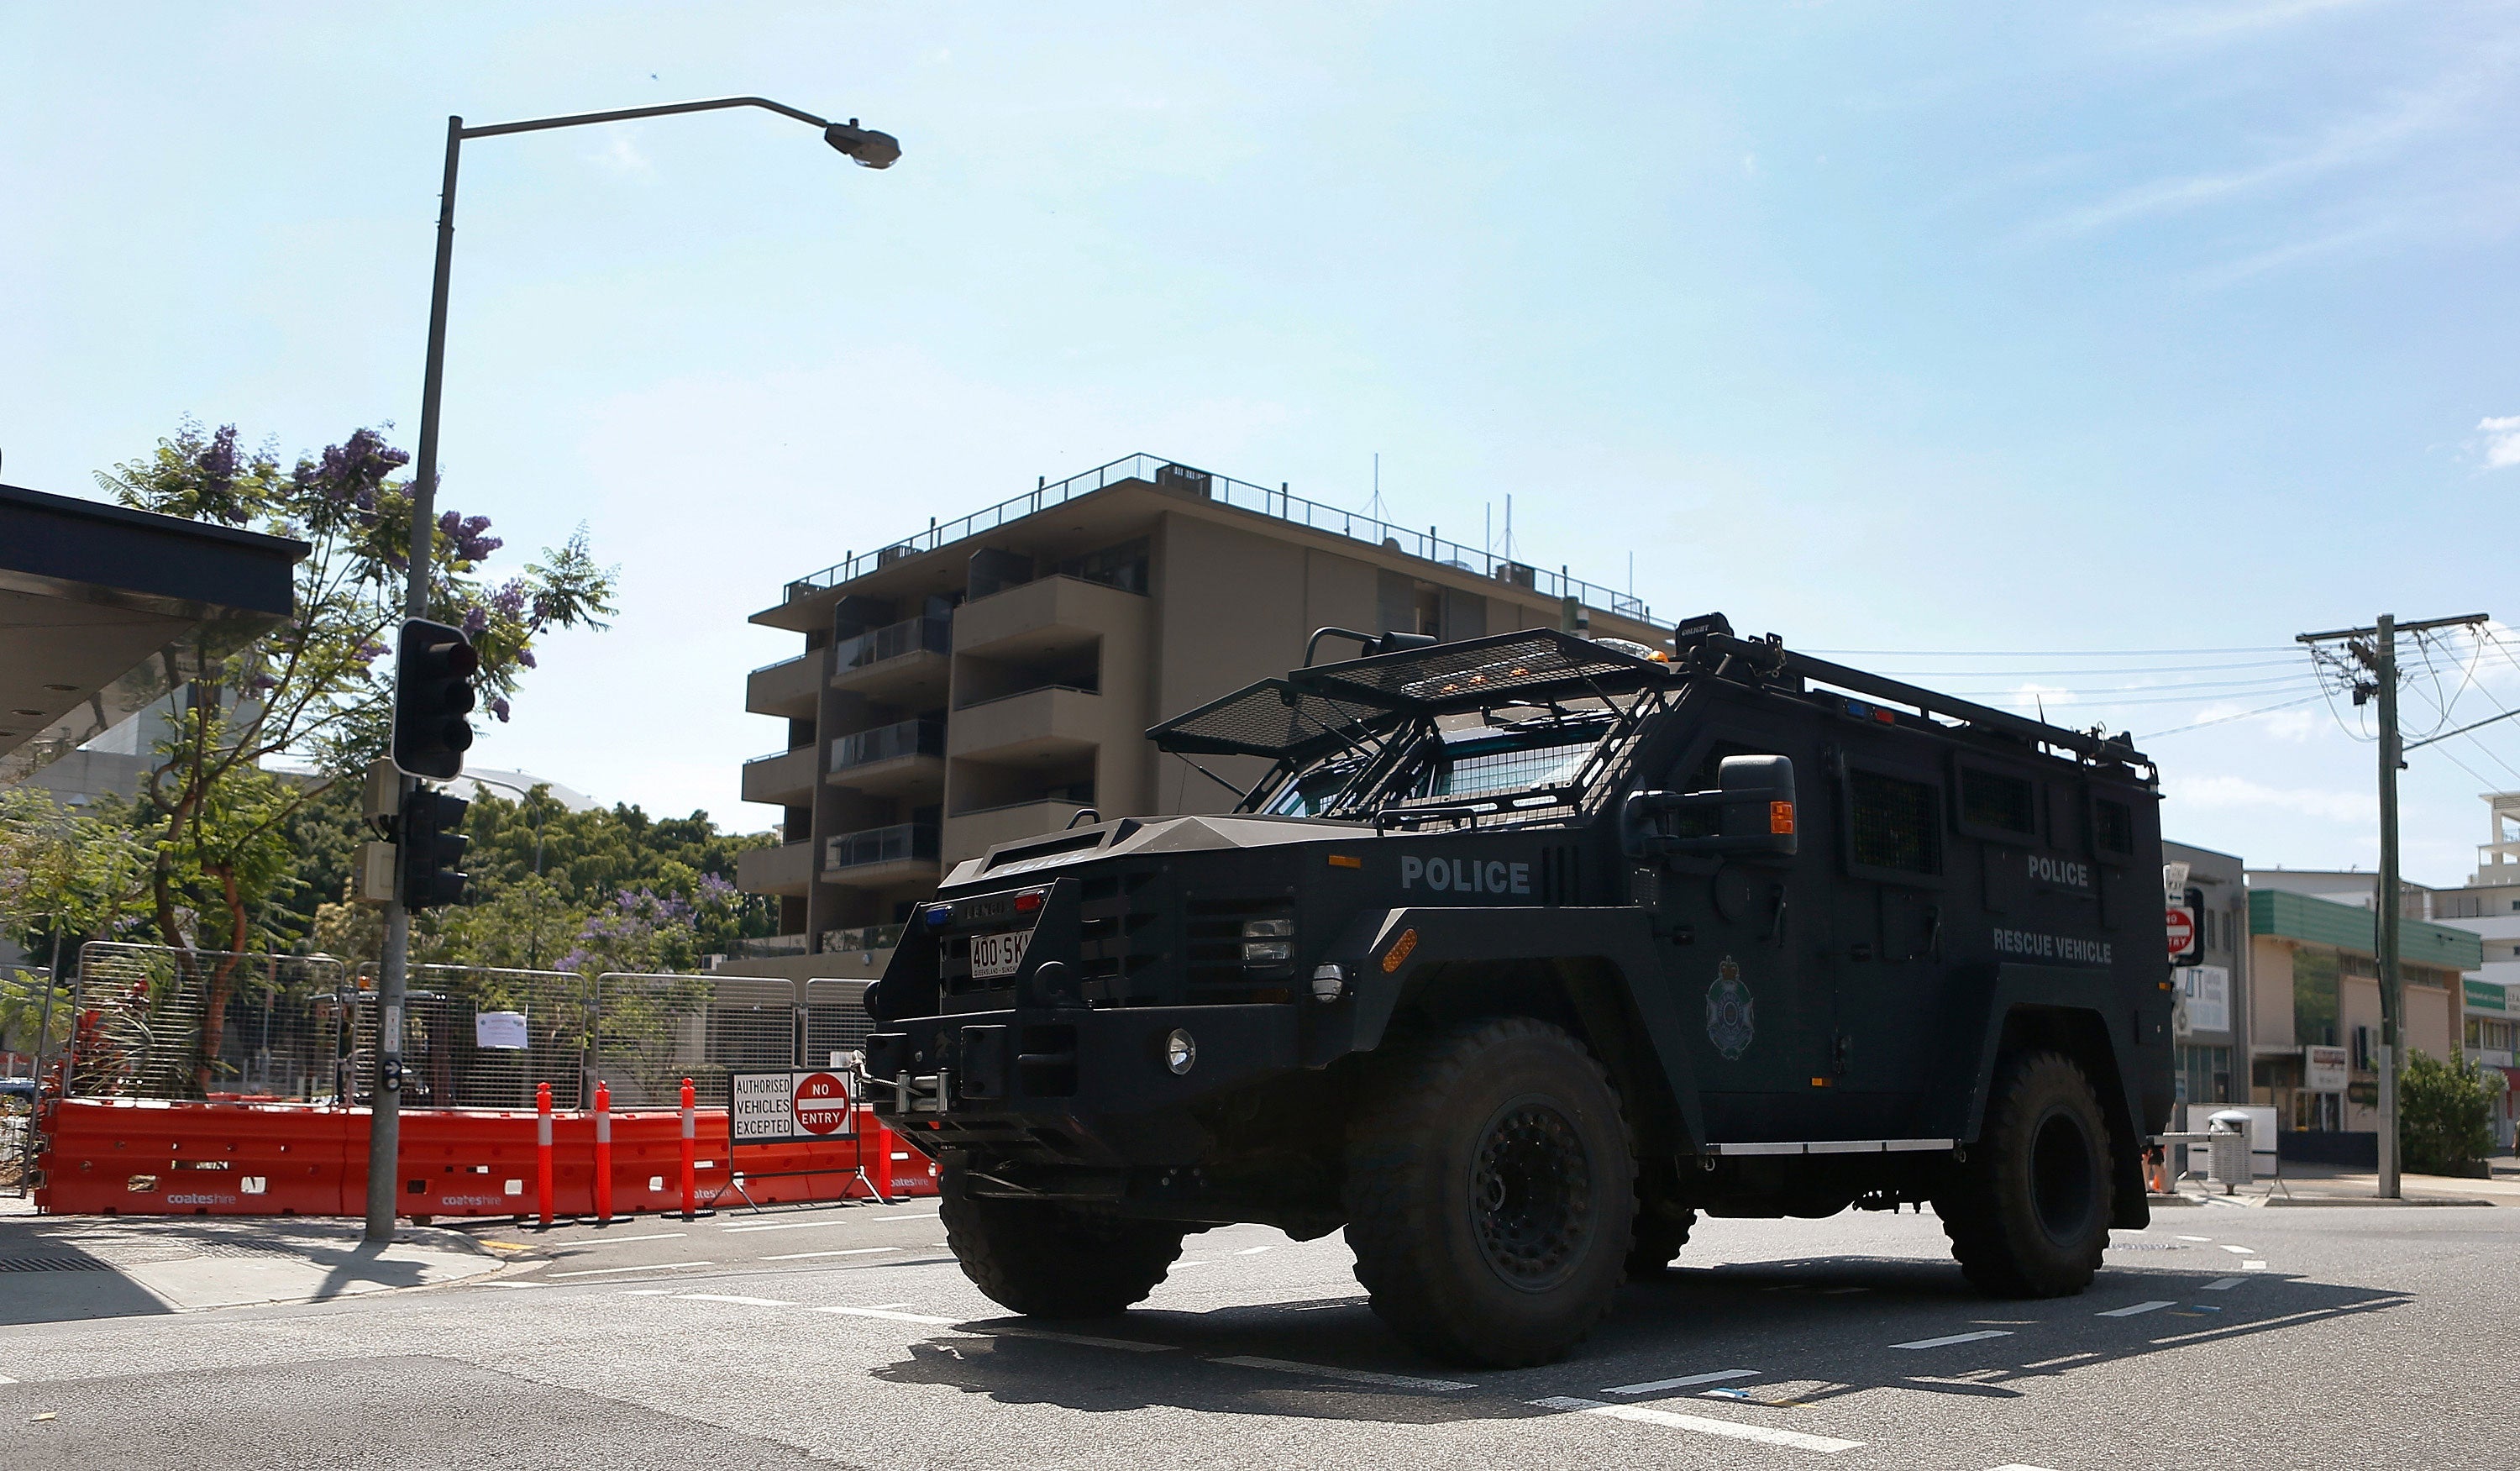 An armoured police vehicle patrols near the Brisbane Convention and Exhibition Centre on November 16, 2014 in Brisbane, Australia